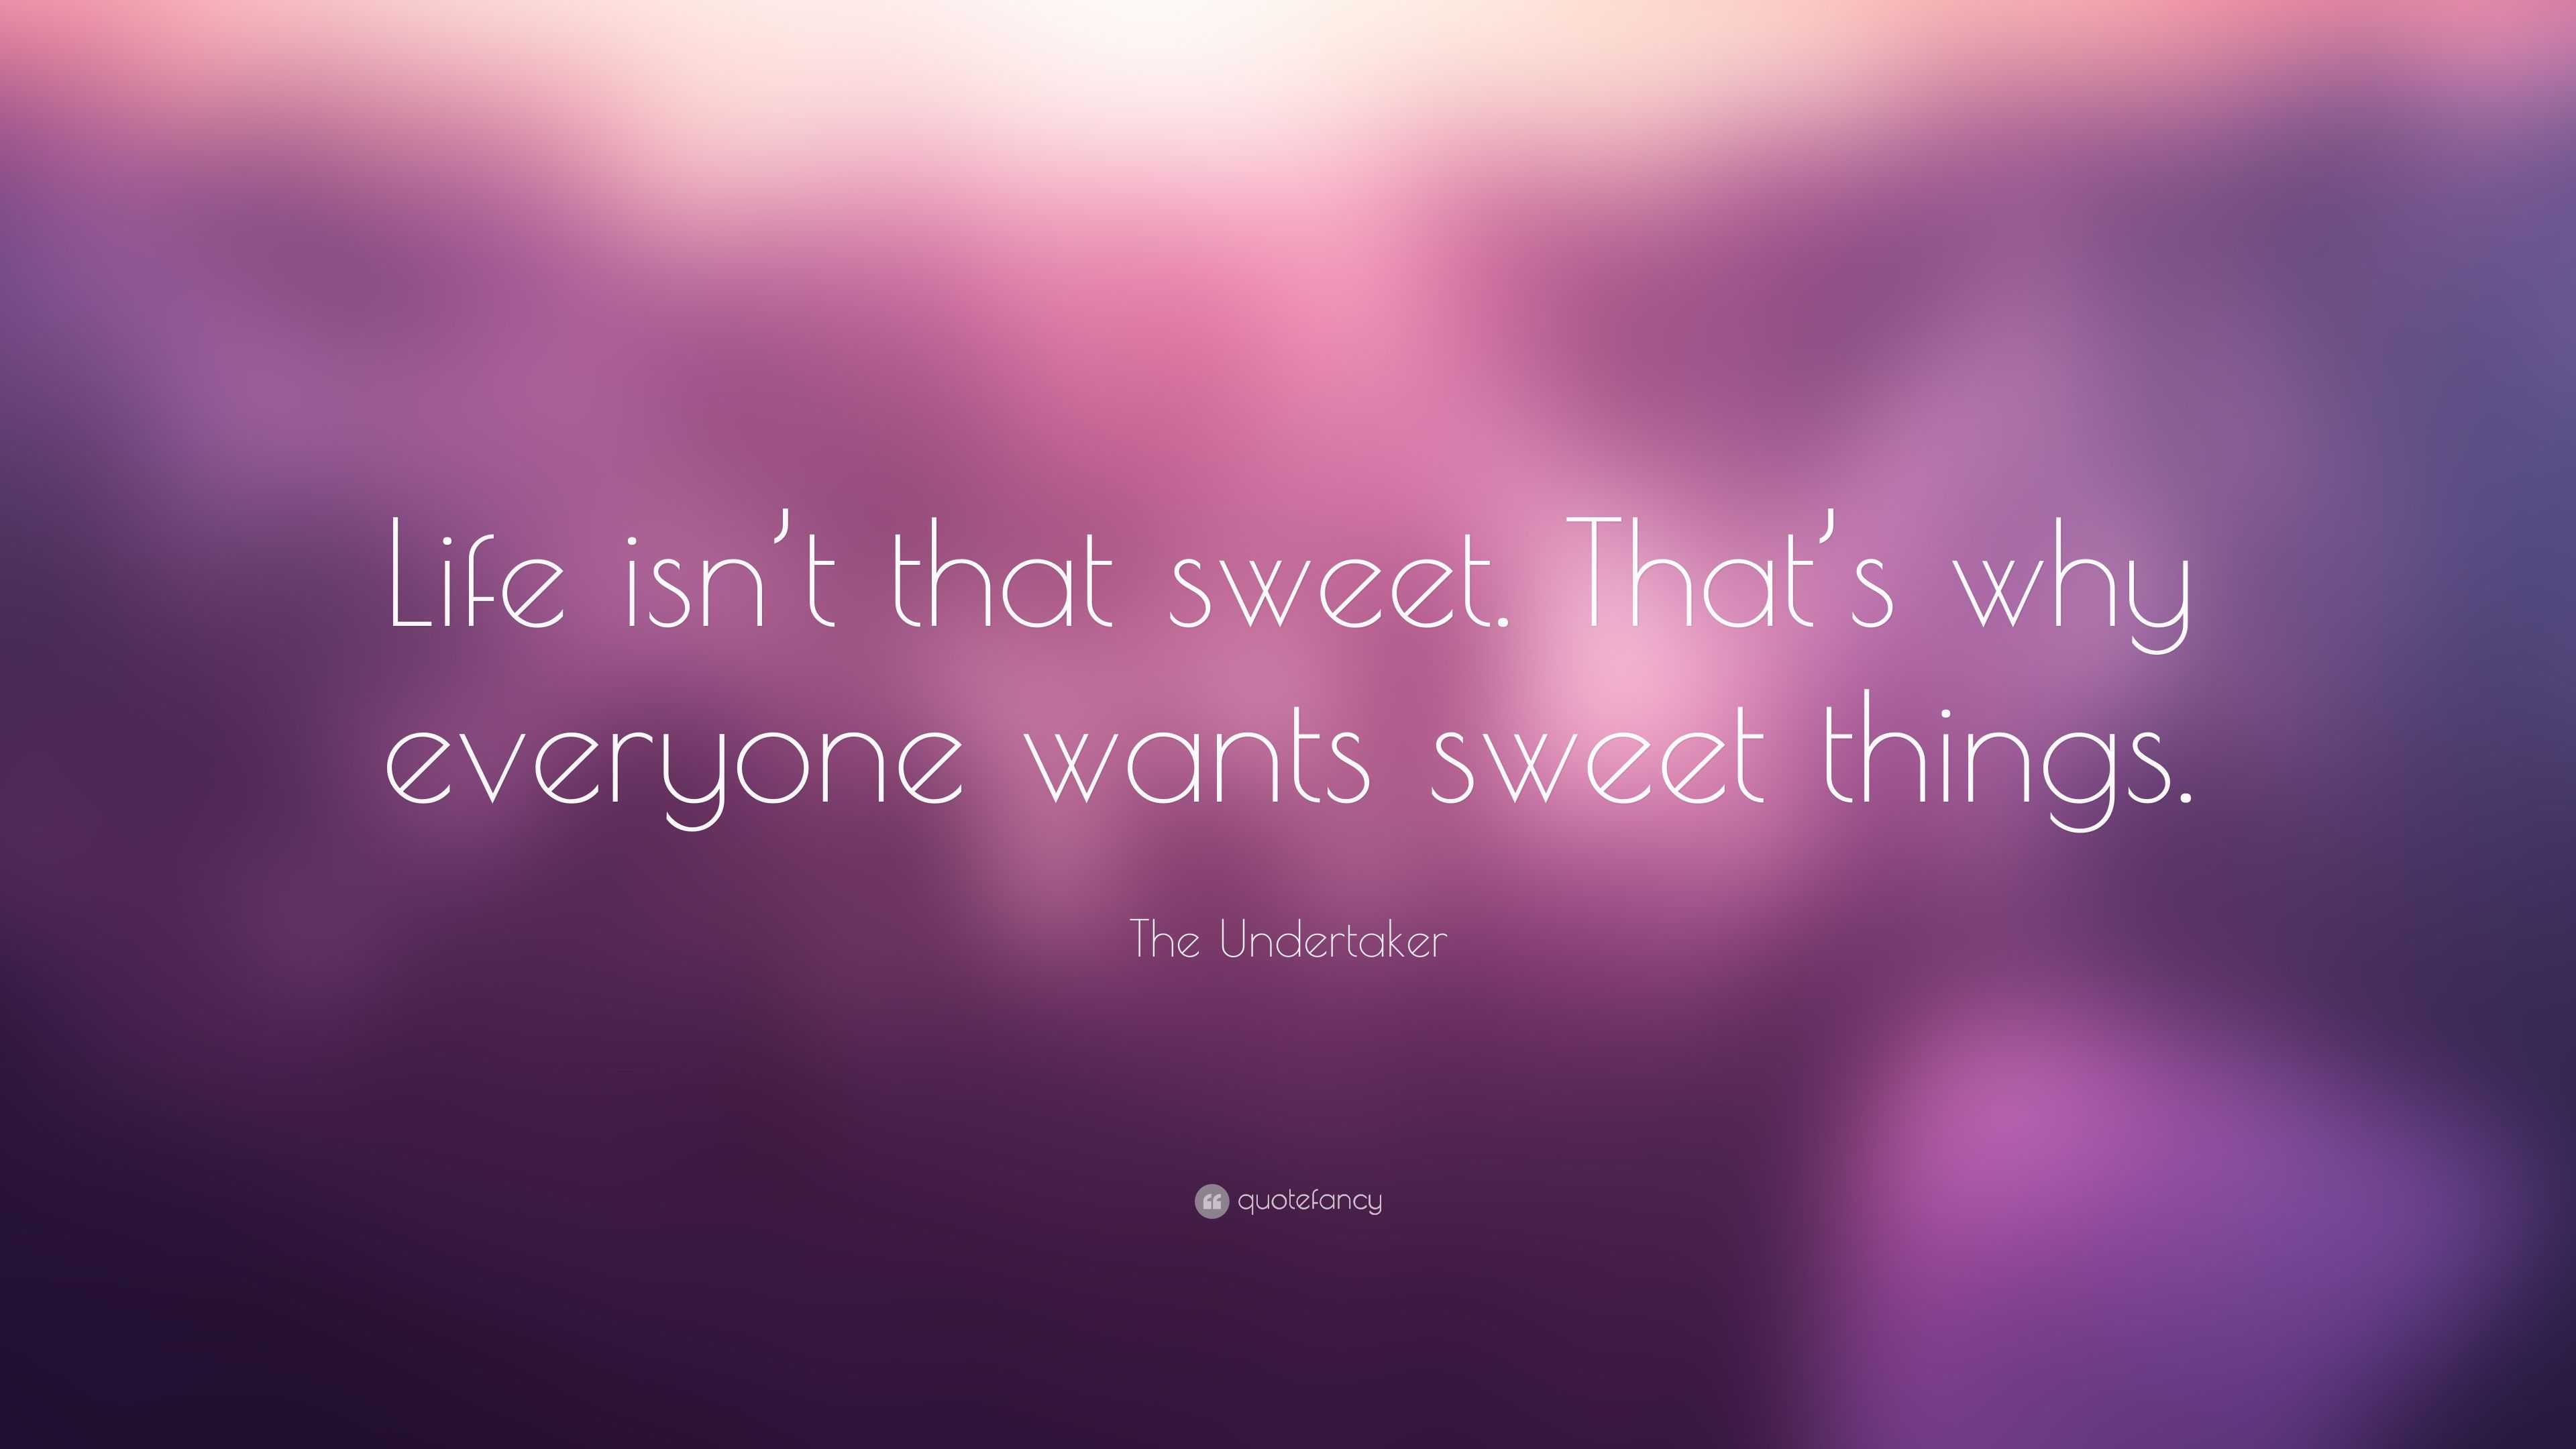 The Undertaker Quote: “Life isn’t that sweet. That’s why everyone wants ...